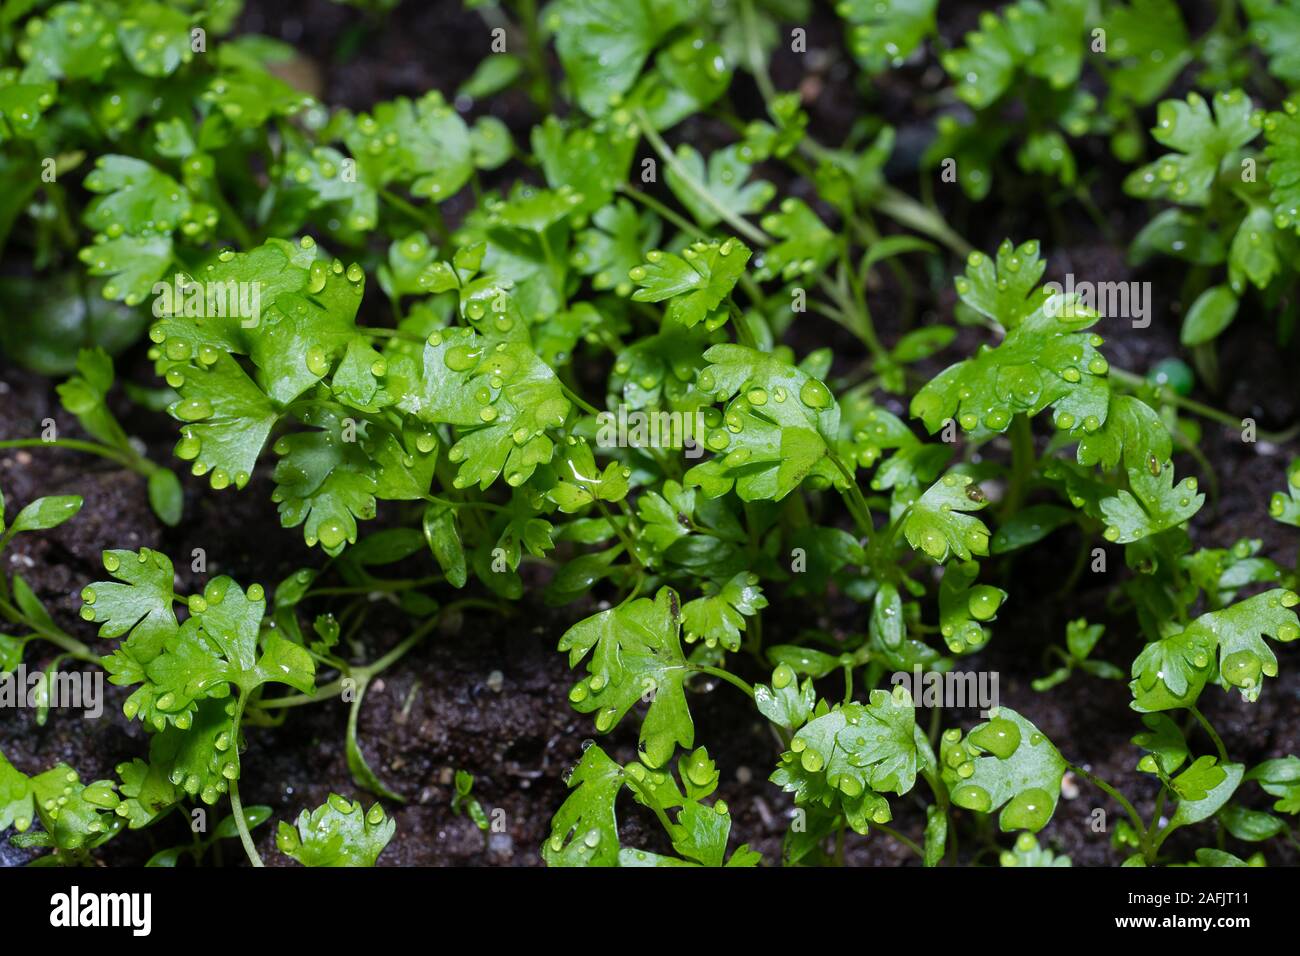 Celery young plant seeding Stock Photo